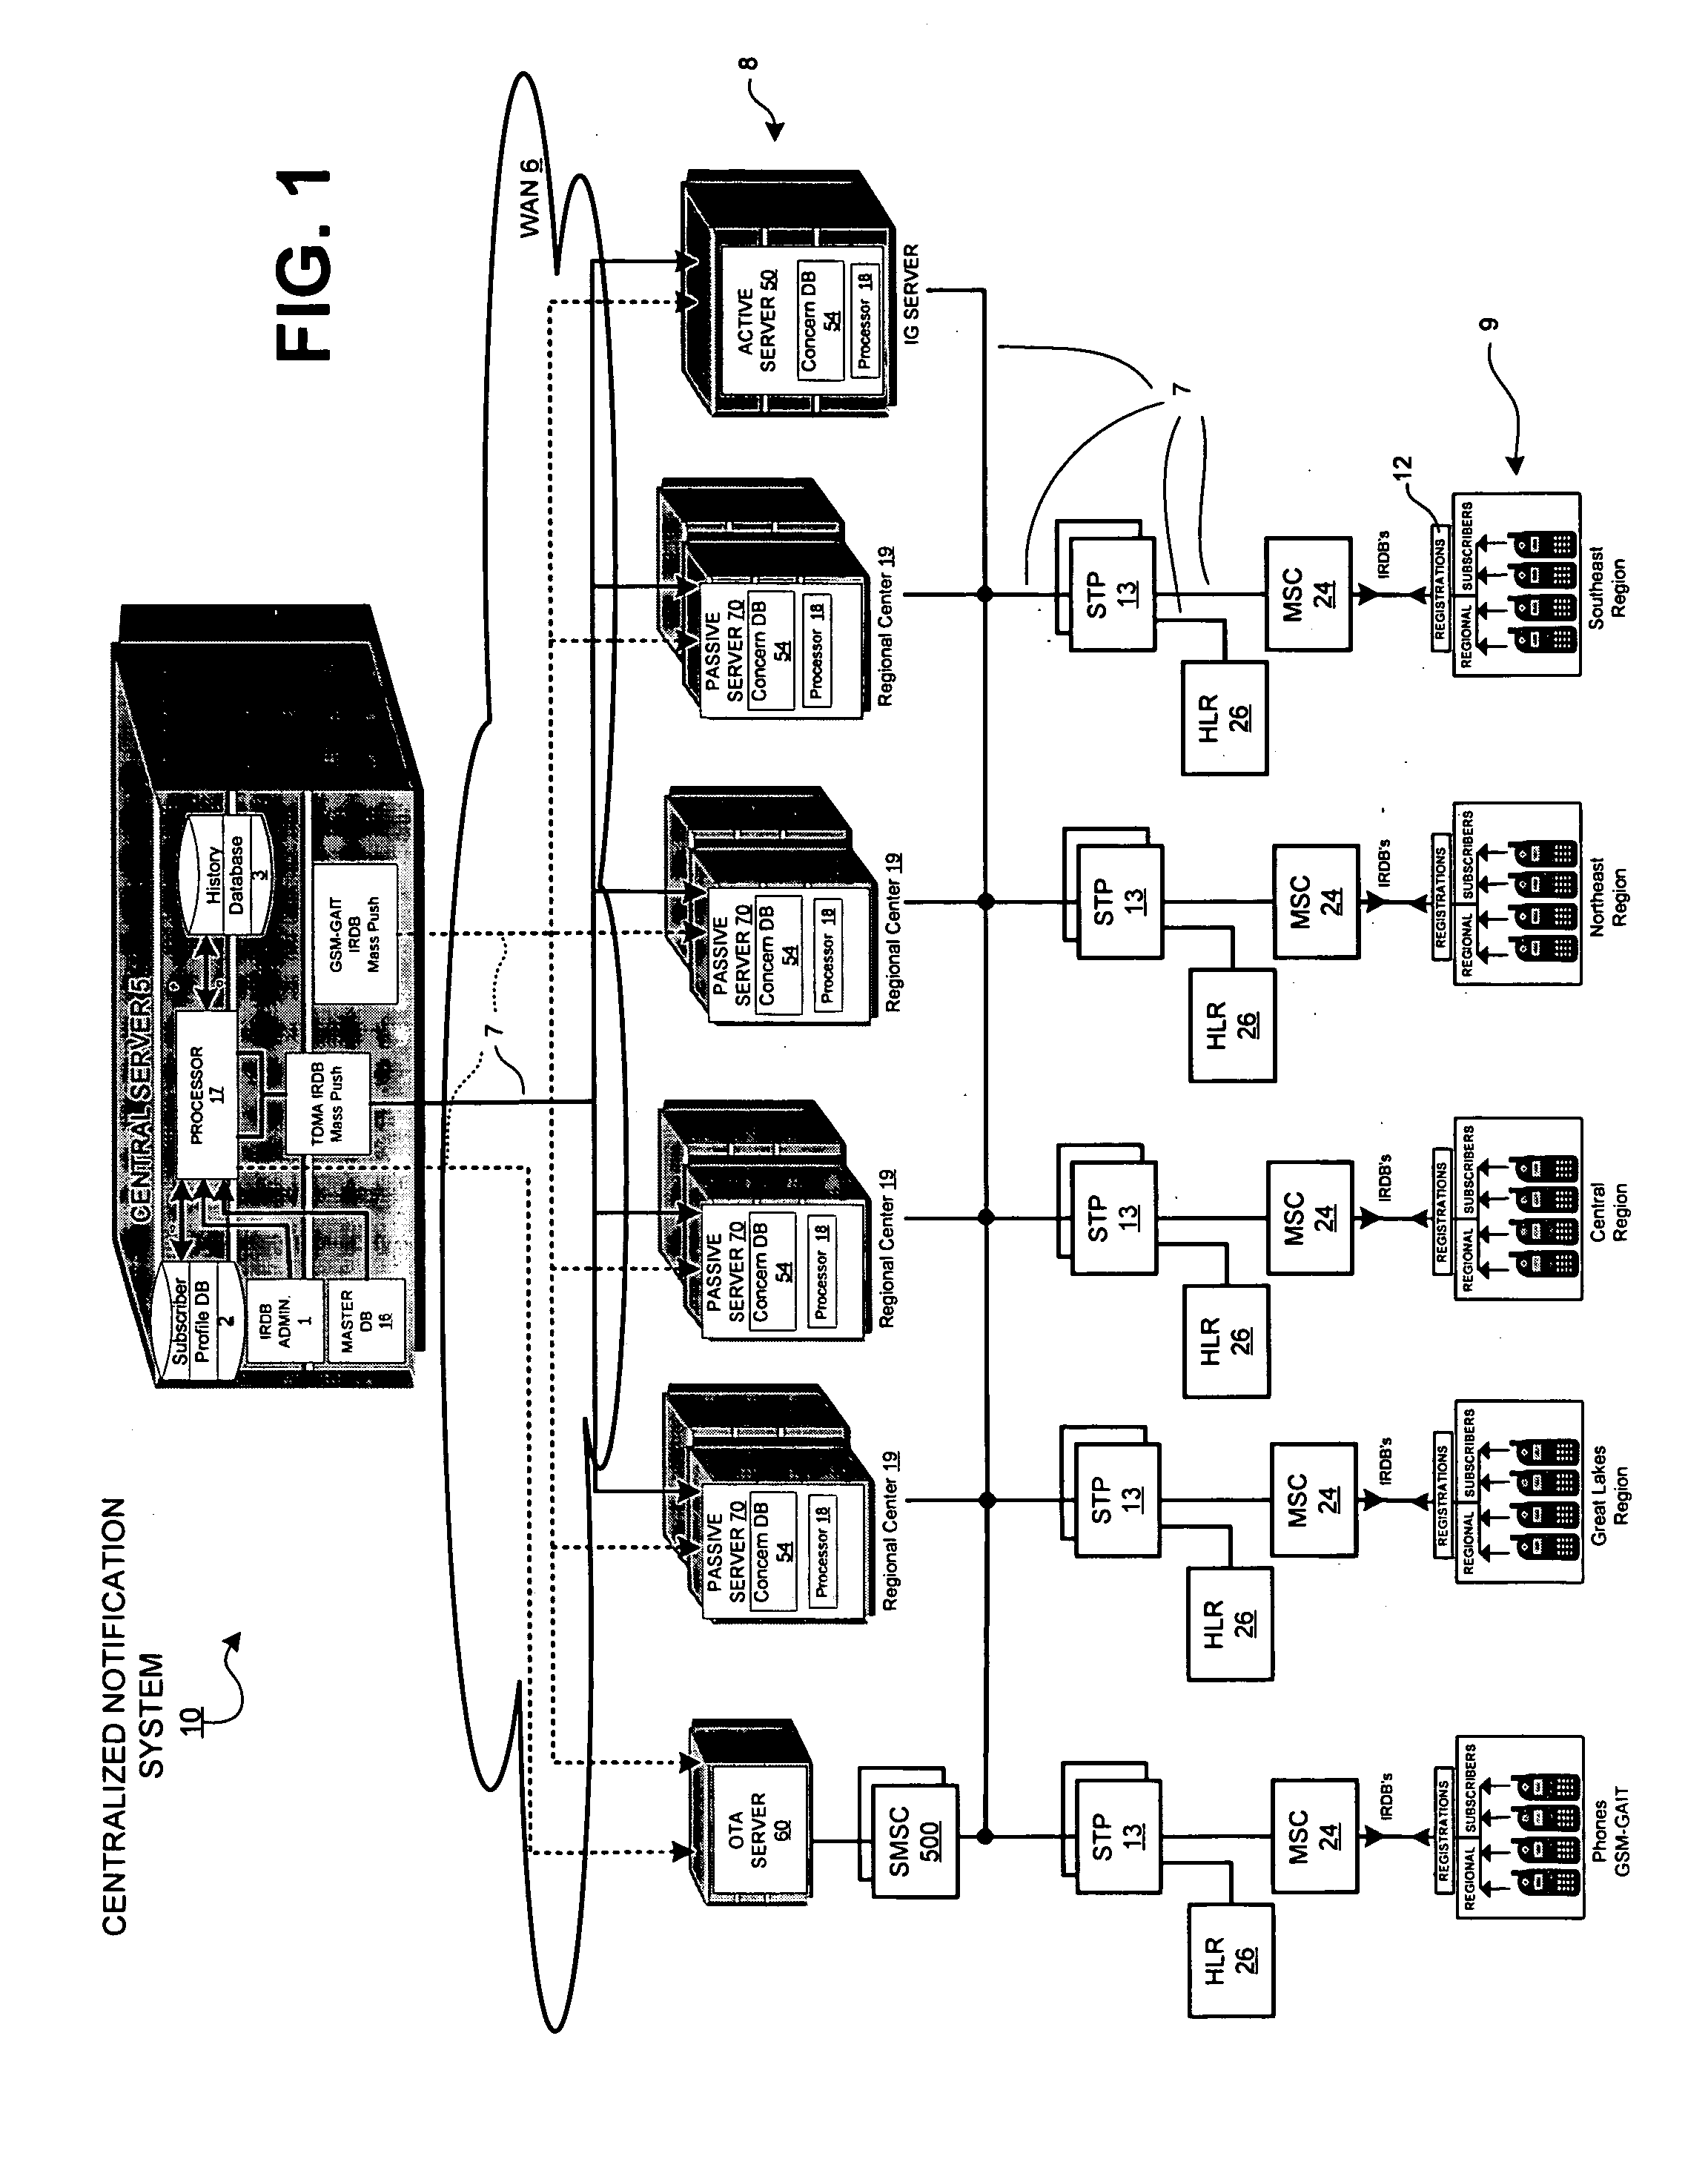 Systems and methods for management and delivery of messages in a centralized notification system